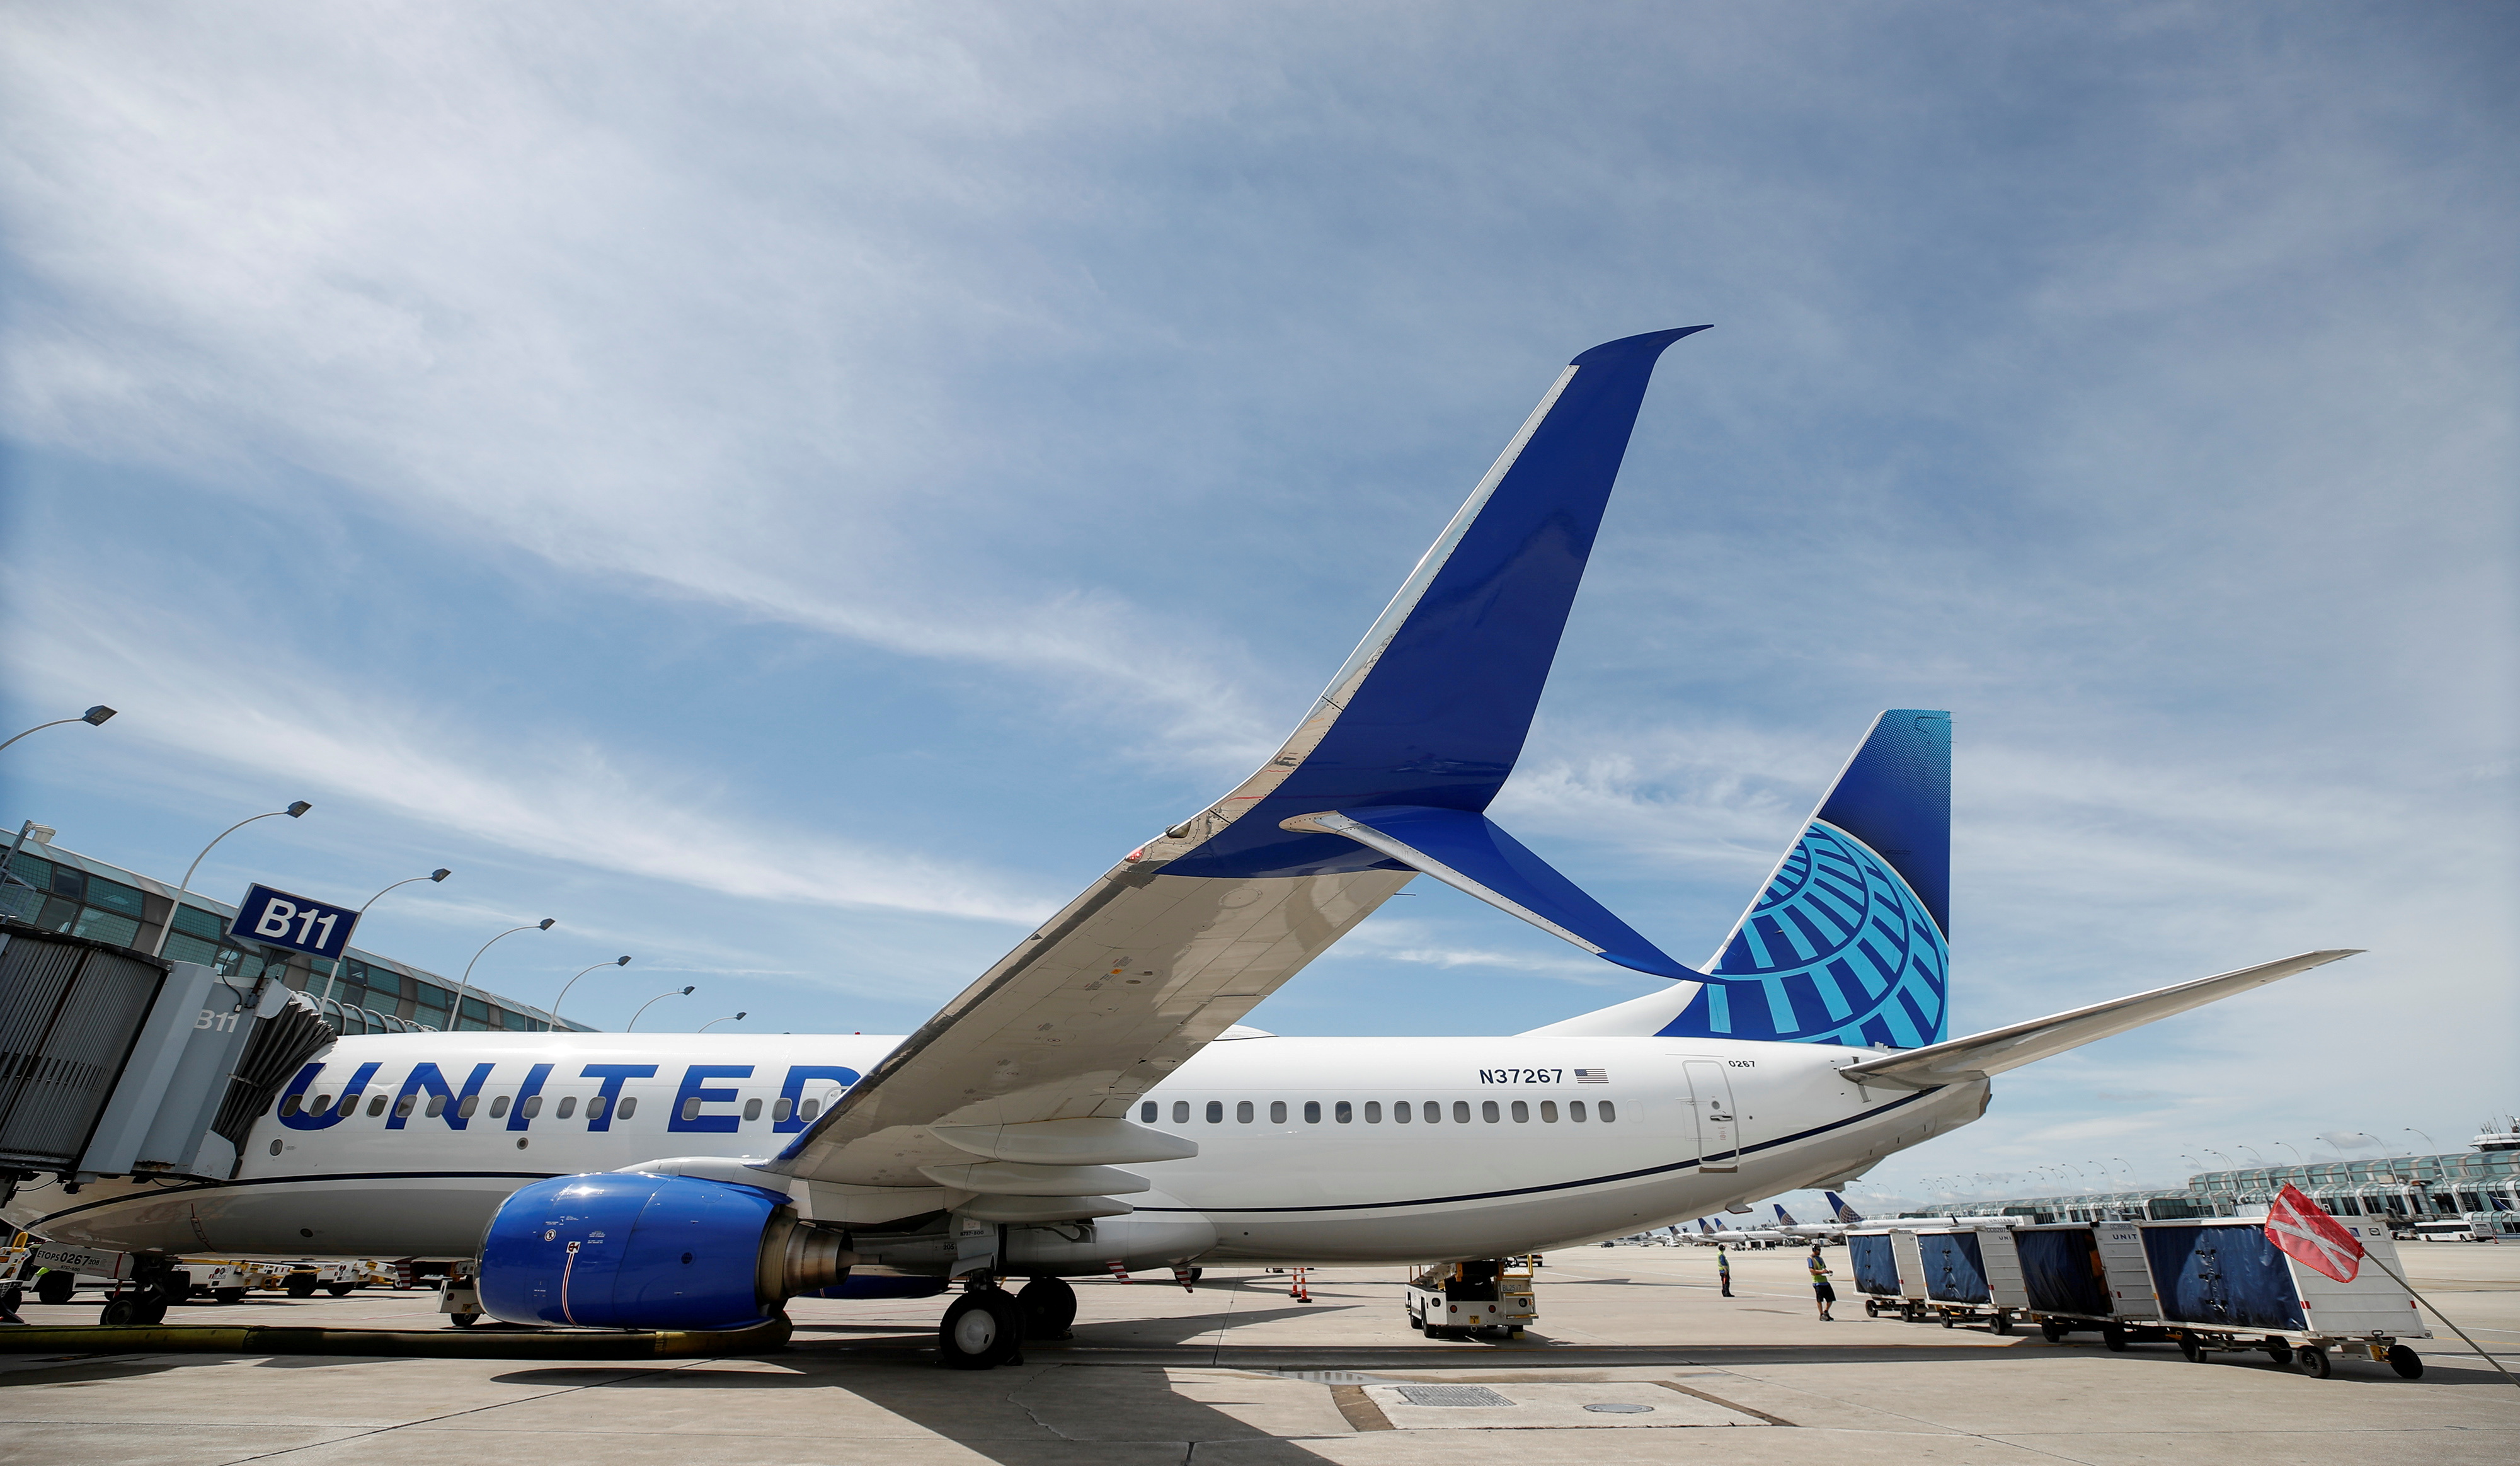 A United Airlines Boeing 737-800 is sitting at a gate after arriving at O'Hare International Airport in Chicago, Illinois, USA, June 5, 2019. REUTERS / Kamil Krzaczynski